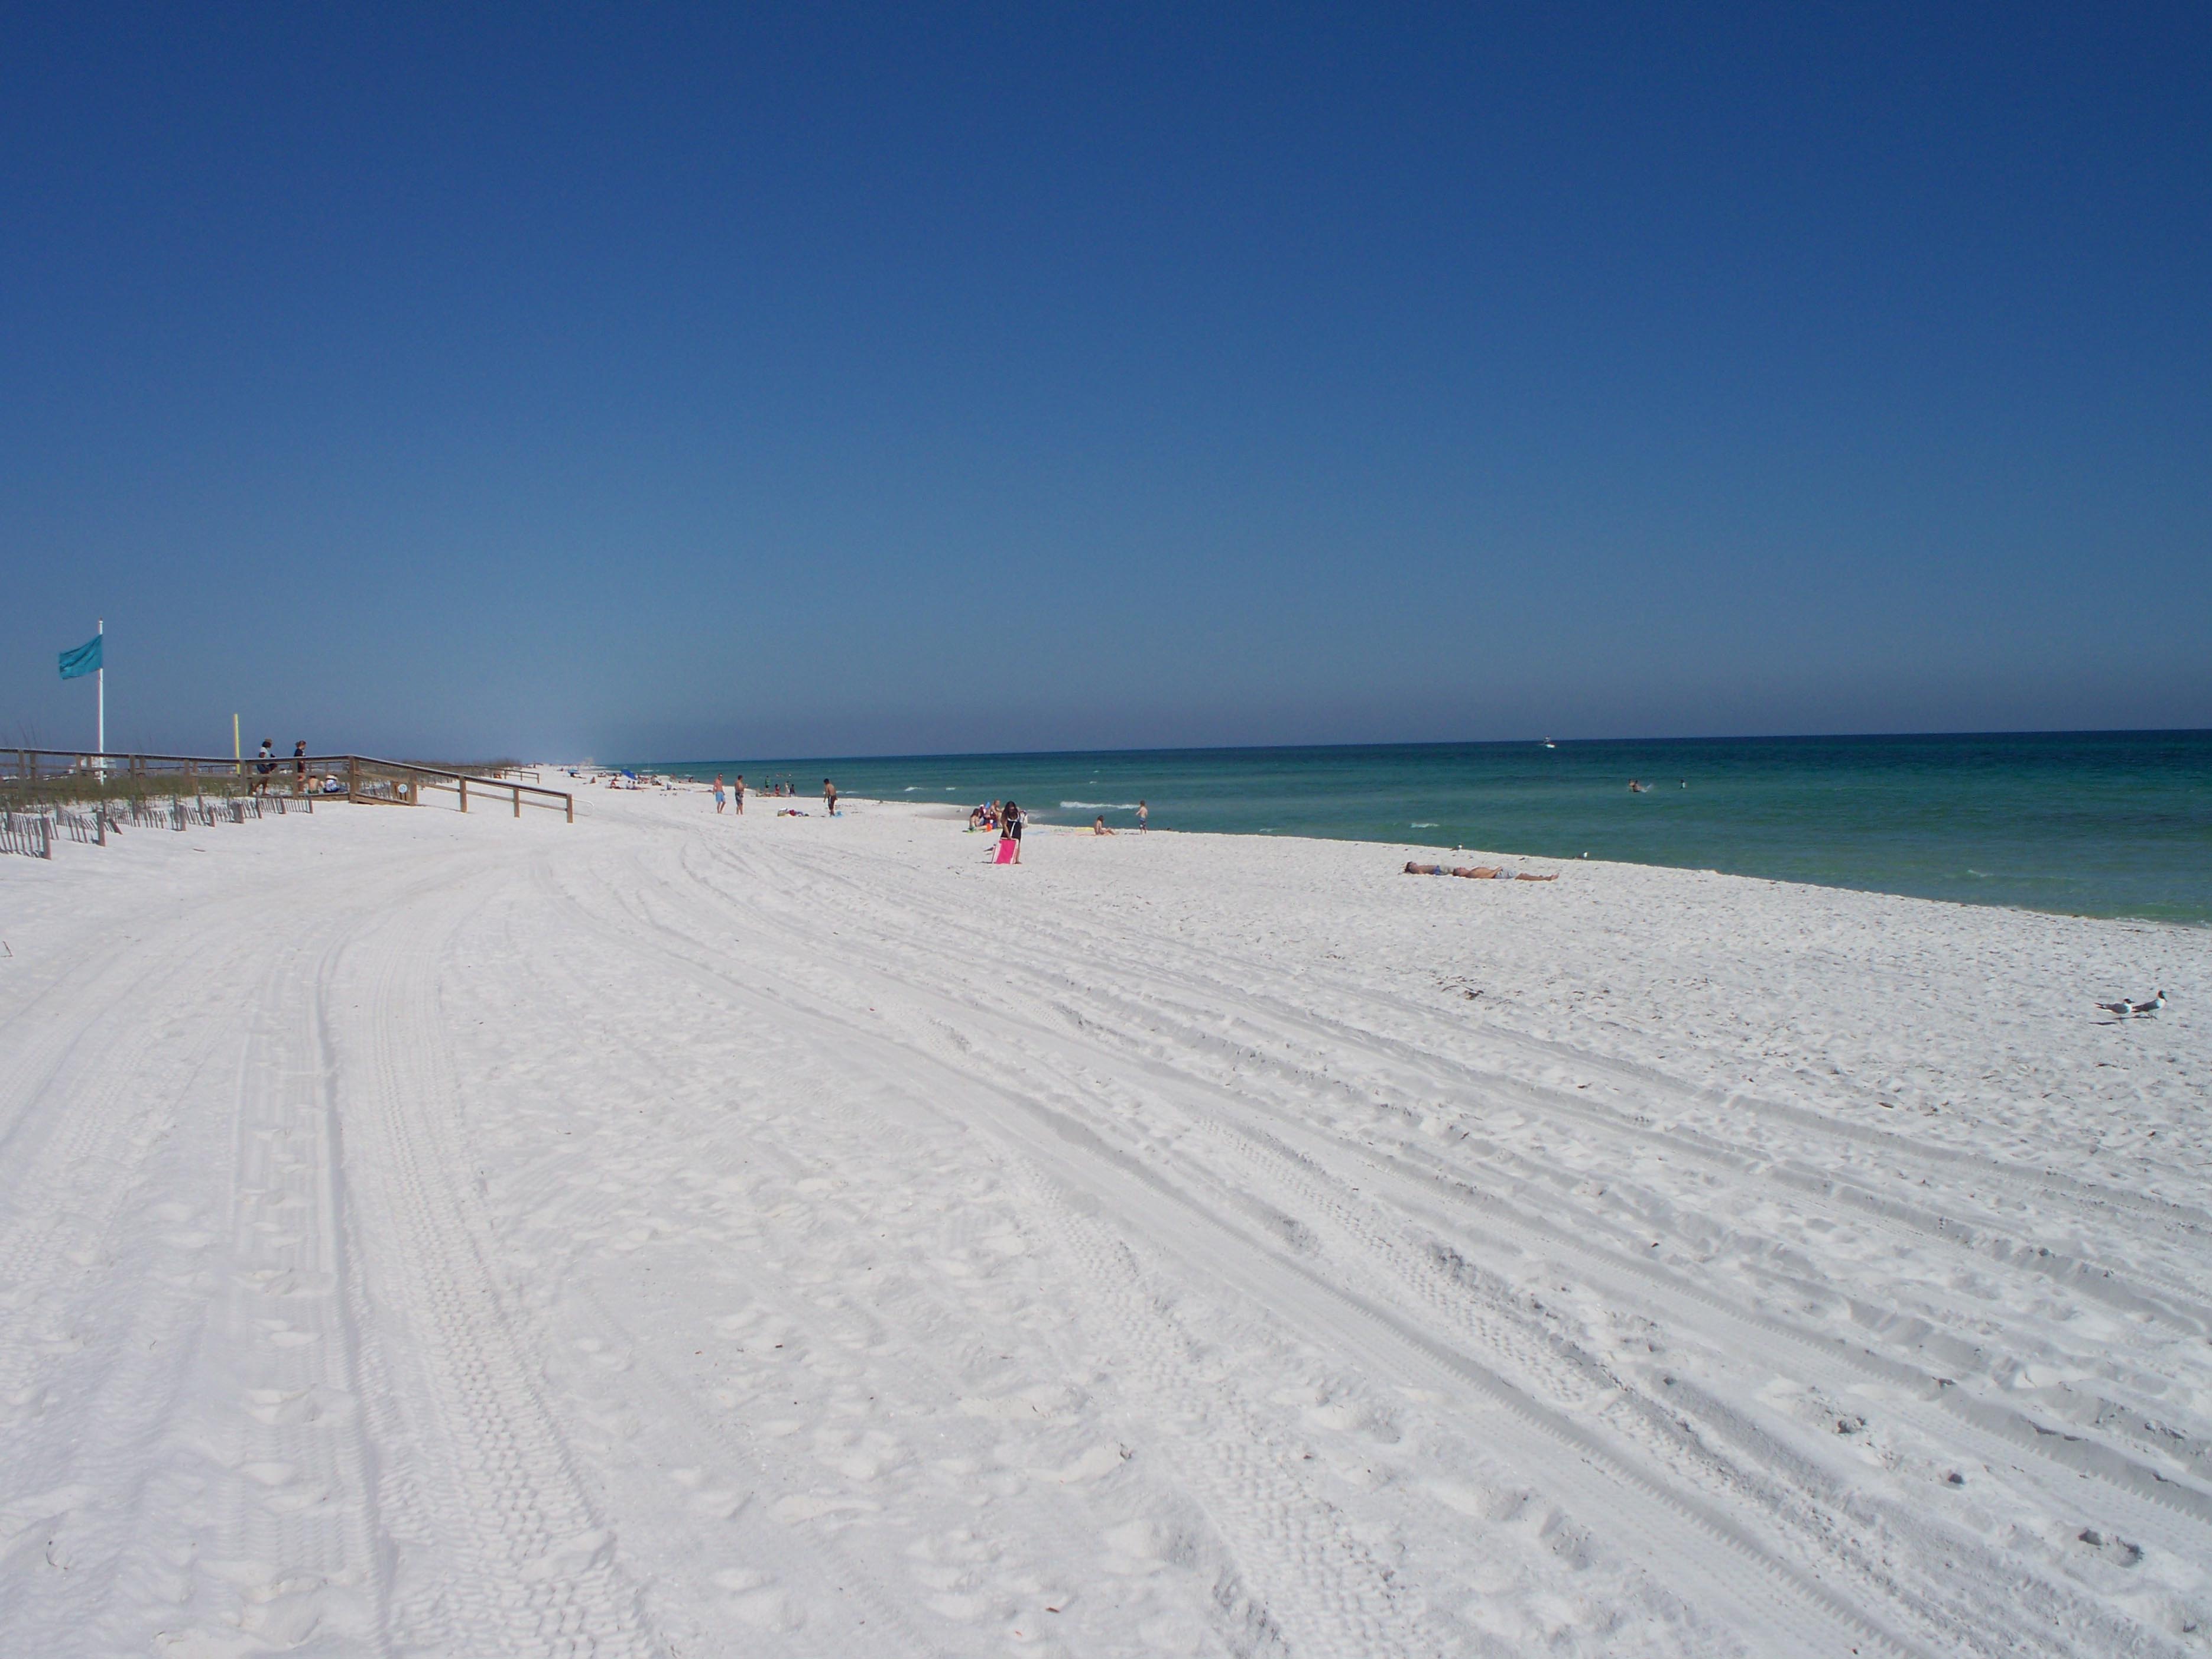 The beach and Gulf of Mexico at Navarre Beach, Florida